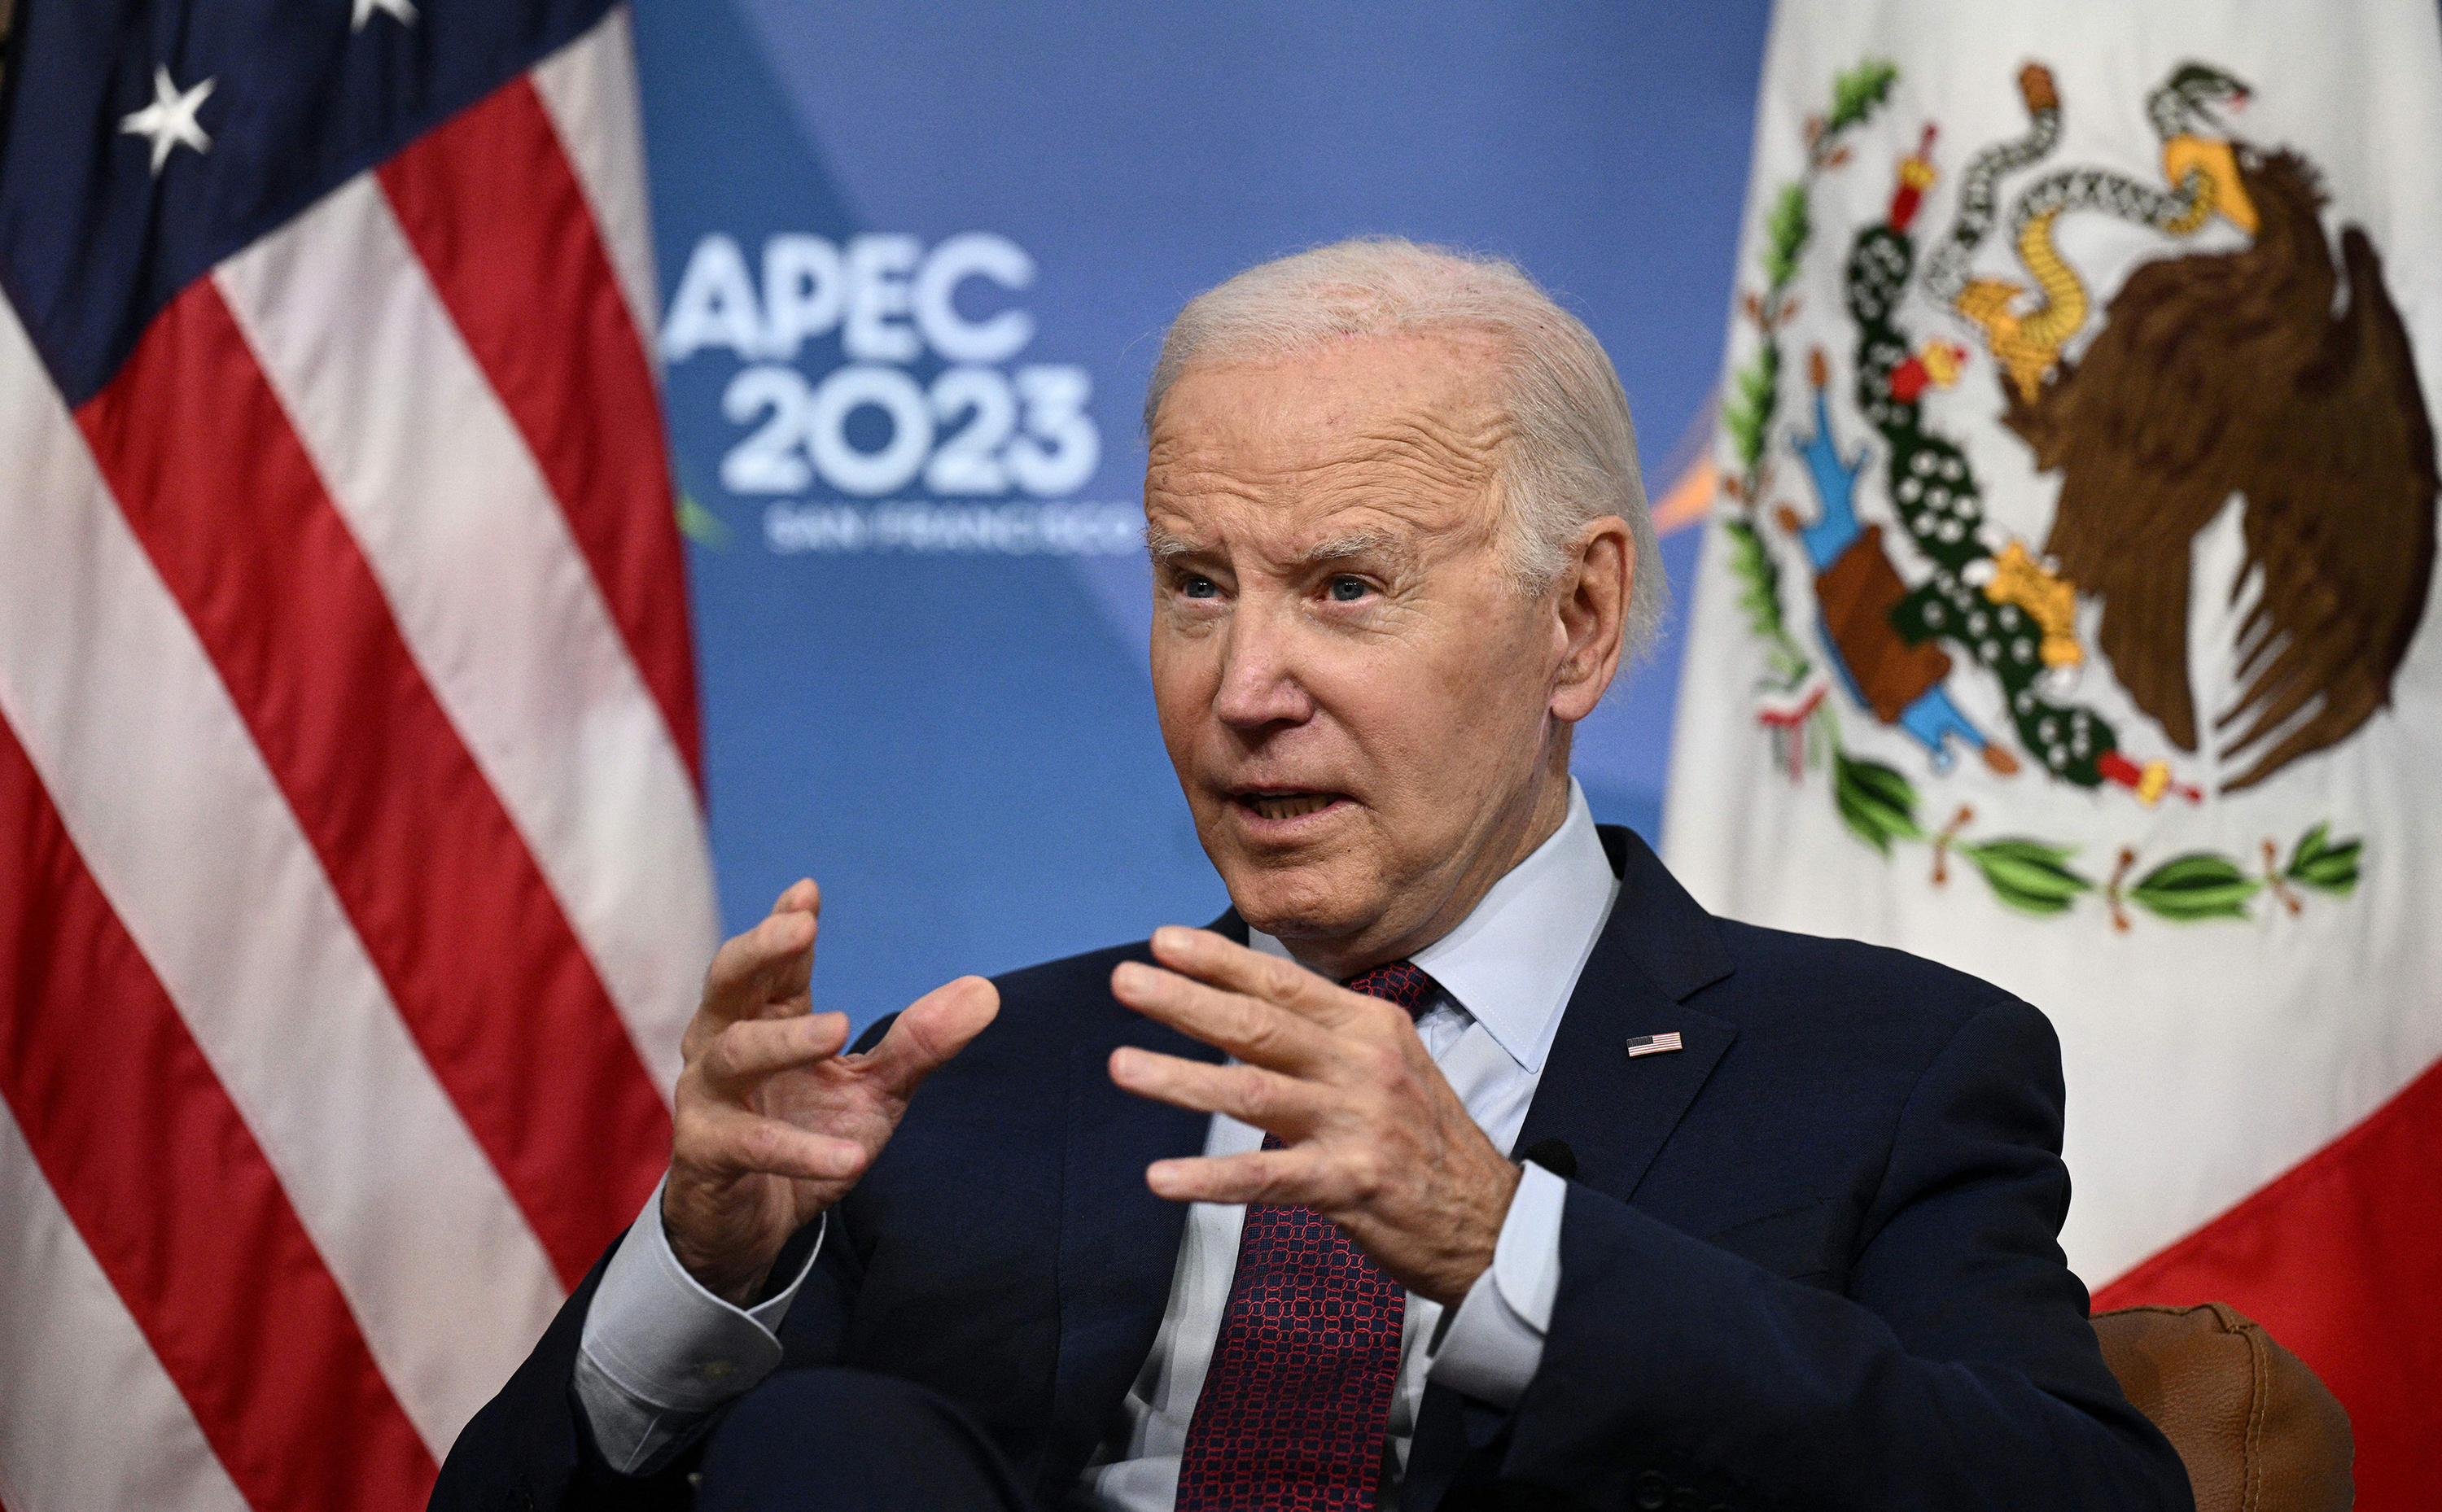 US President Joe Biden speaks during a bilateral meeting on the last day of the Asia-Pacific Economic Cooperation (APEC) Leaders' Week in San Francisco, California, on November 17.